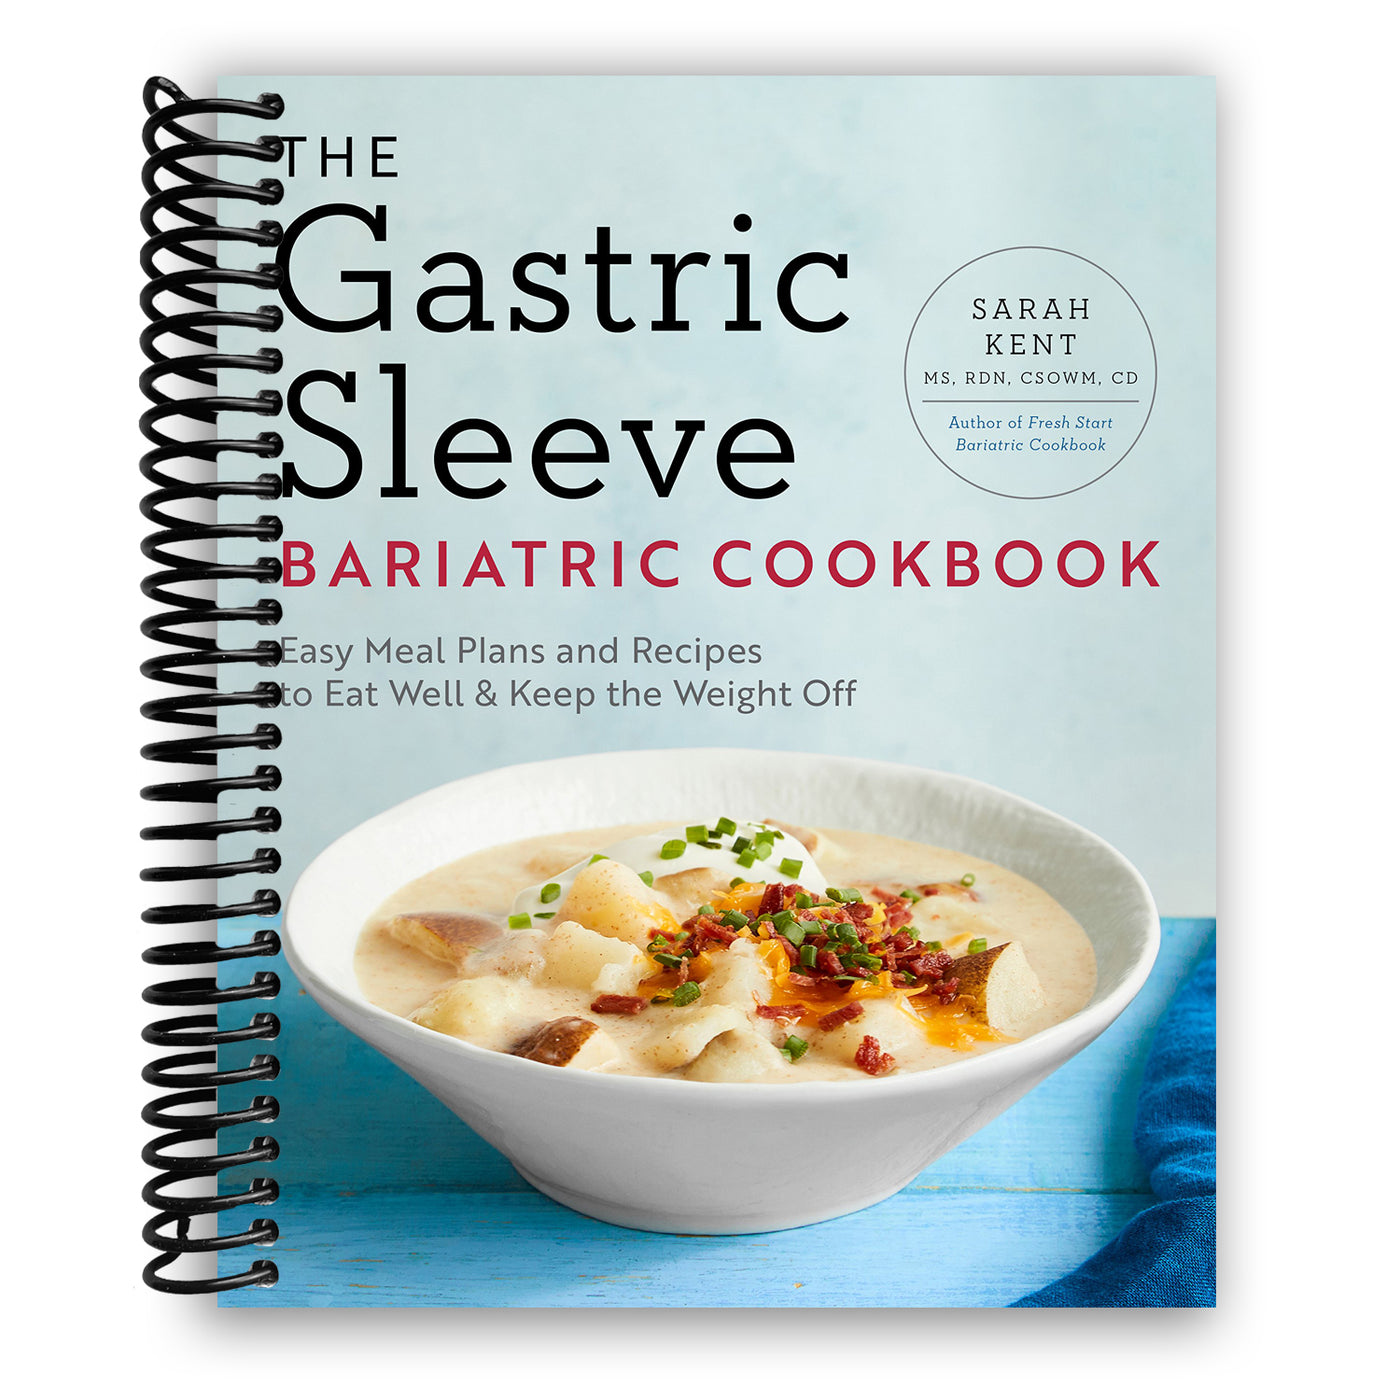 The Gastric Sleeve Bariatric Cookbook: Easy Meal Plans and Recipes to Eat Well & Keep the Weight Off (Spiral Bound)